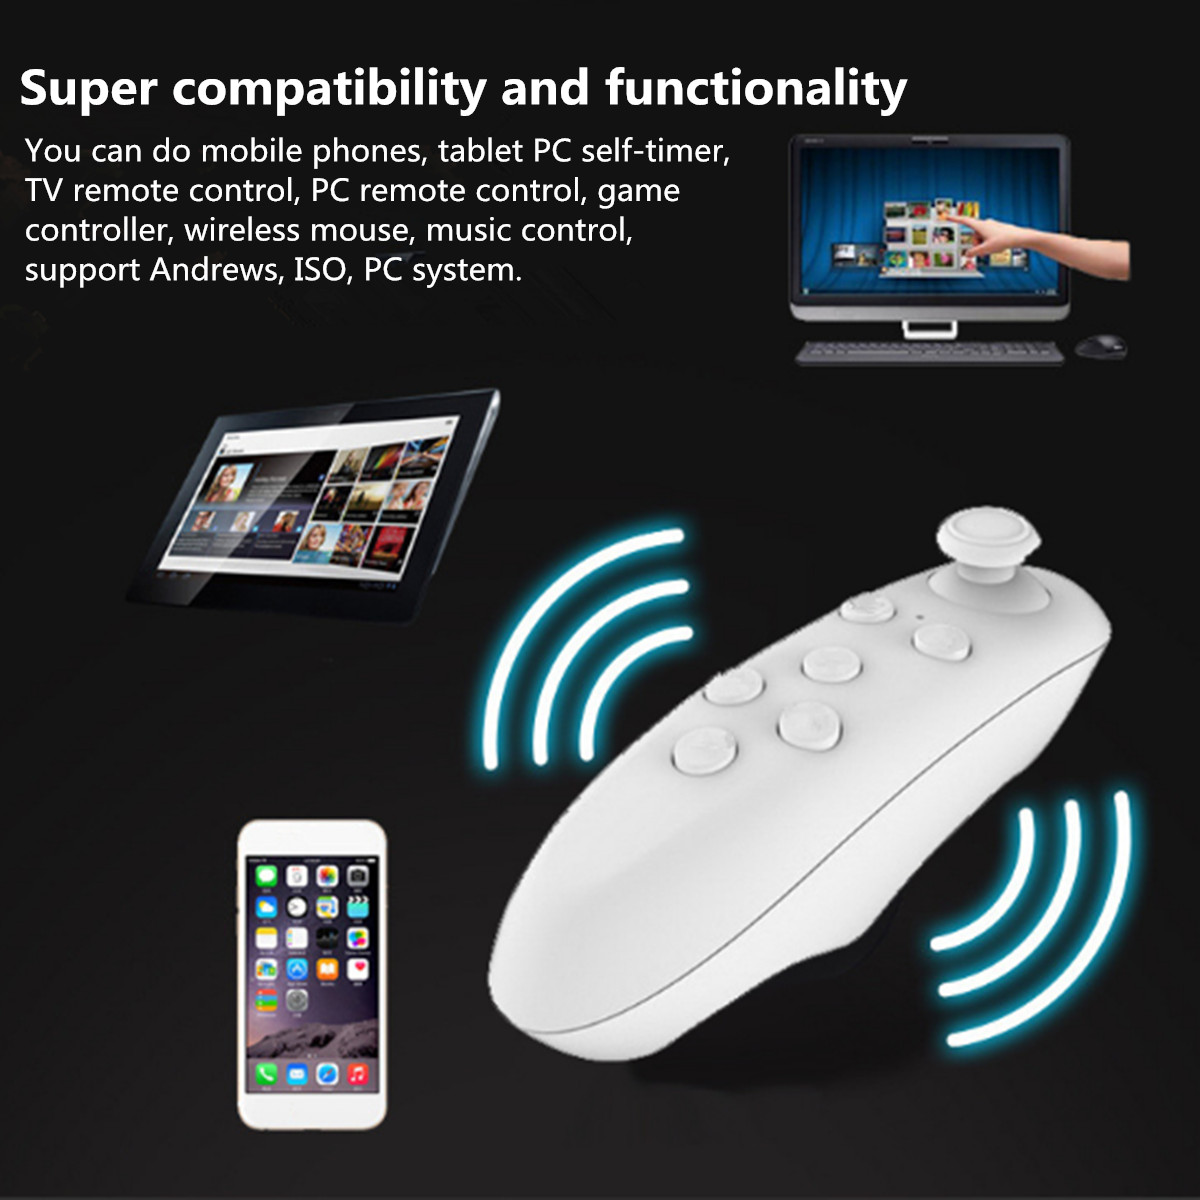 Wireless-Bluetooth-Virtual-Reality-BOX-Remote-Control-Joystick-Gamepad-Controller-for-iPhone-7-Andro-1129803